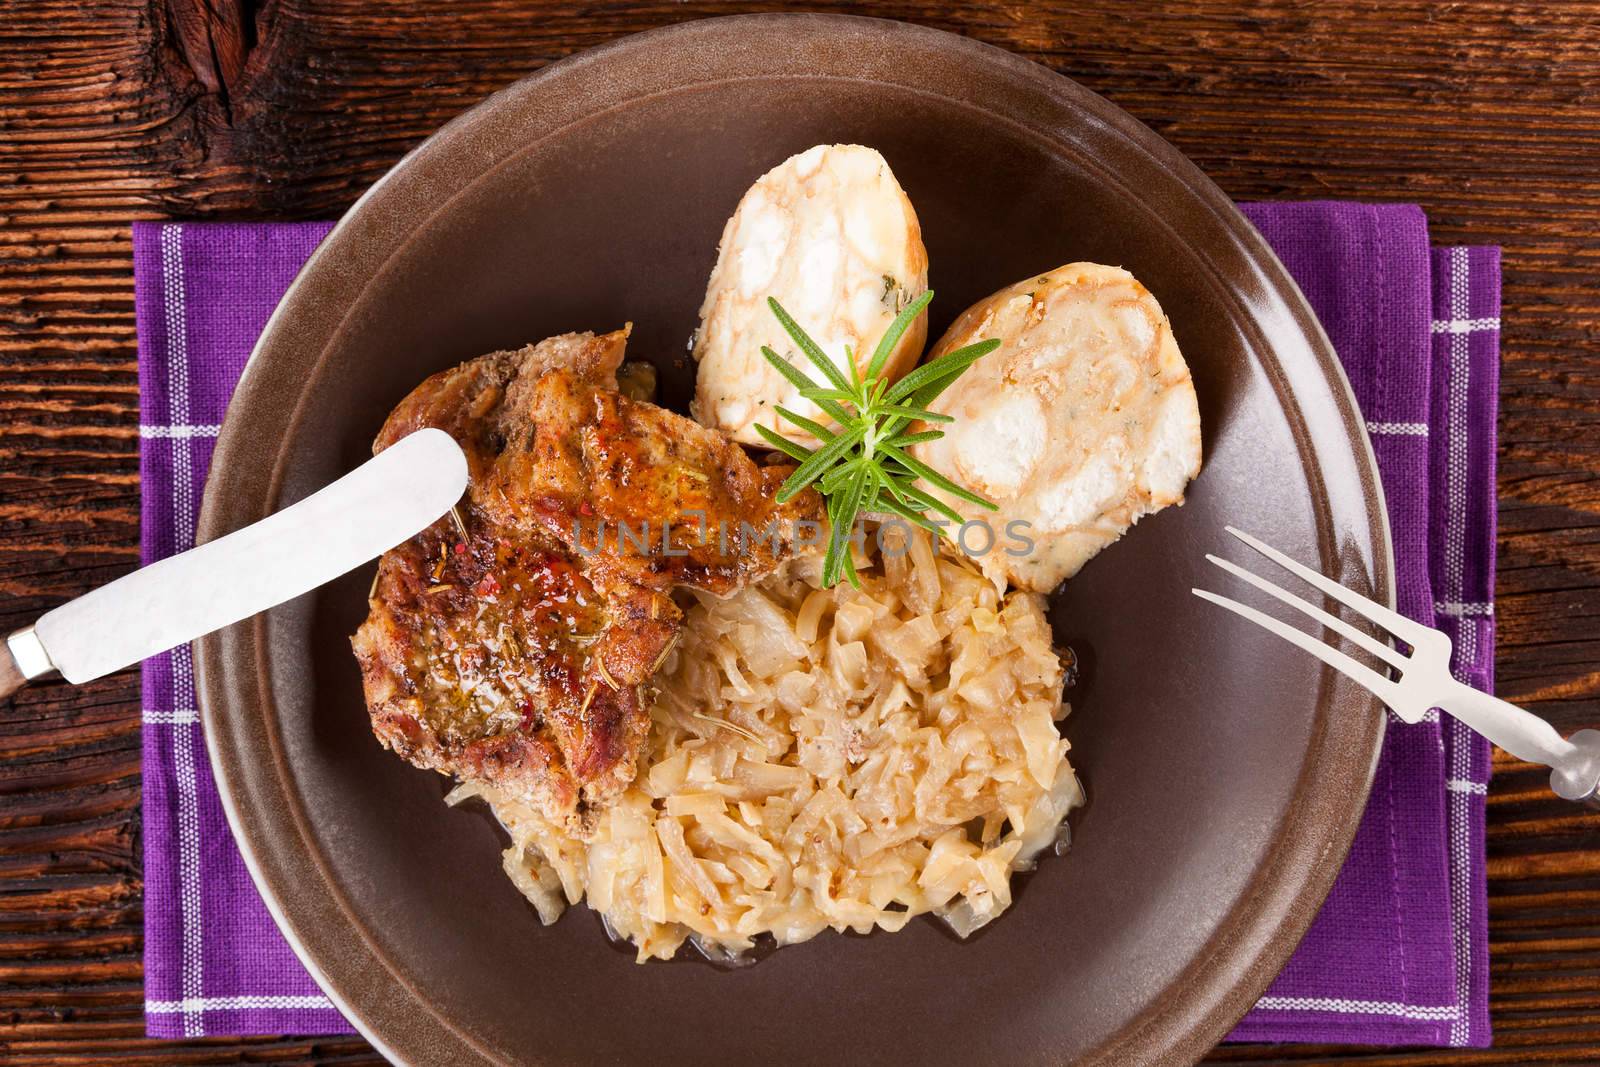 Baked pork chop with dumplings and sauerkraut on plate with silver cutlery on wooden table, top view. 